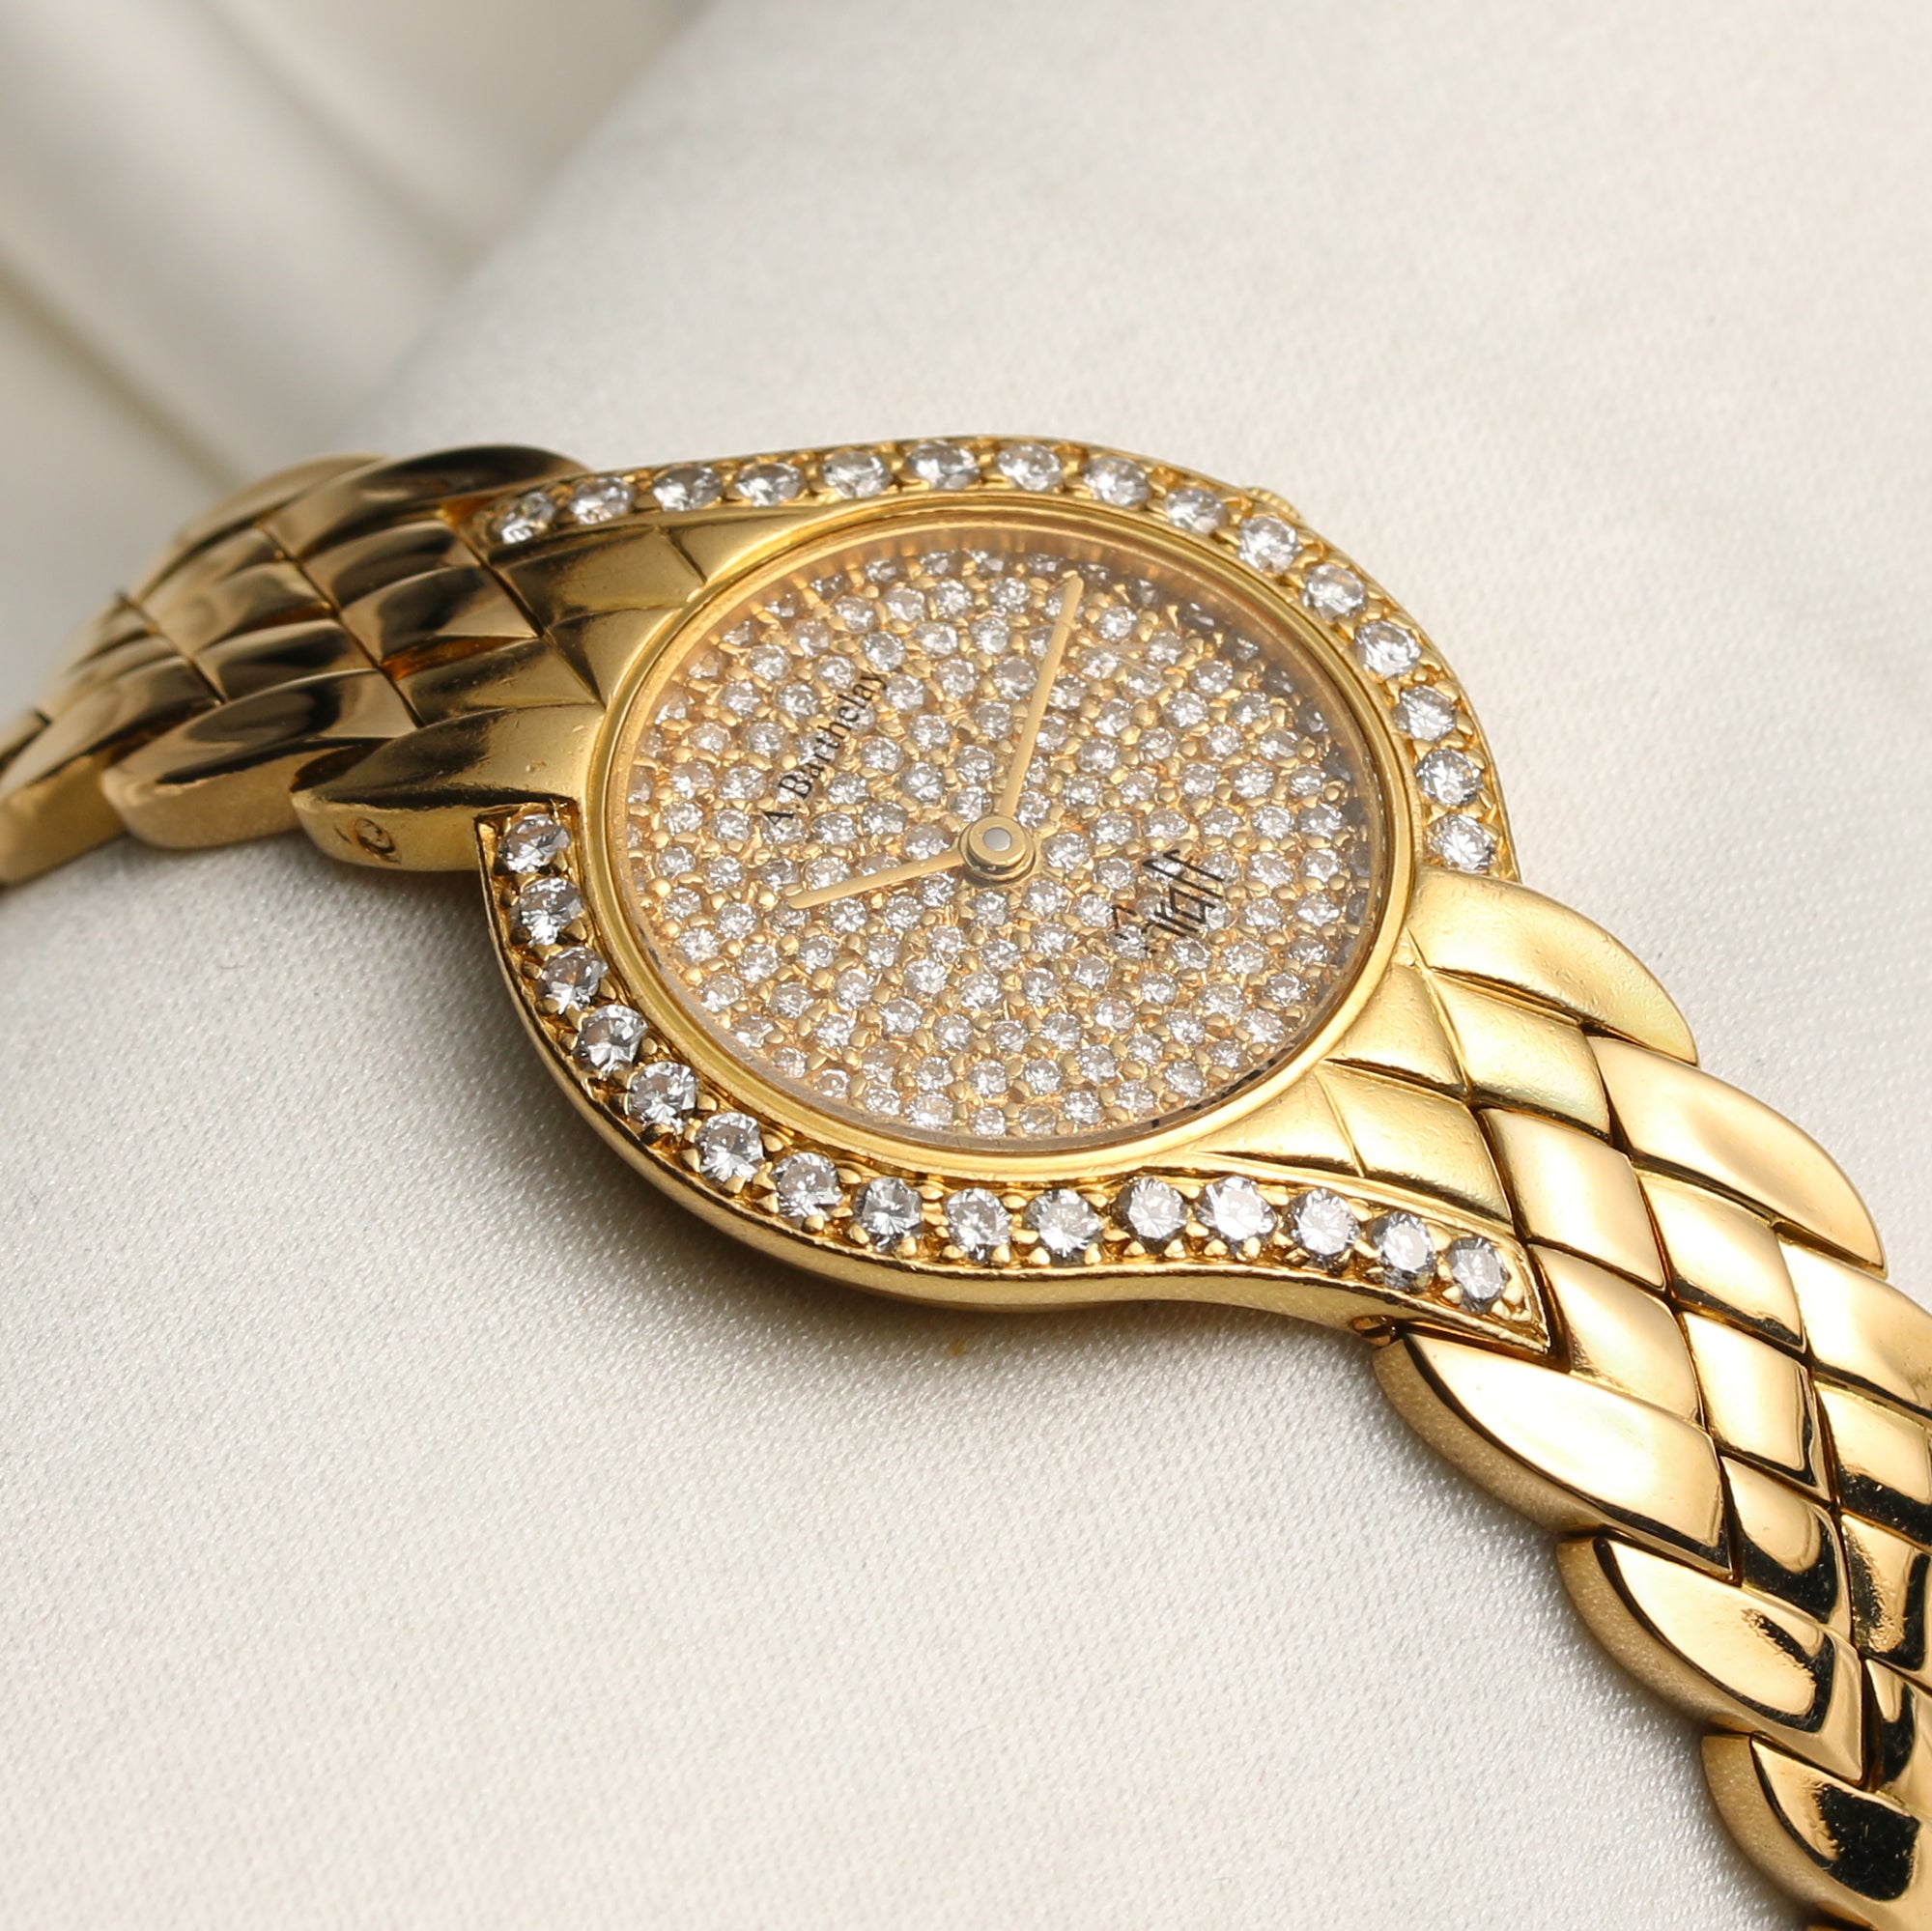 Graff by Alexis Barthelay Ladies Wristwatch in 18k Yellow Gold Pave Di ...